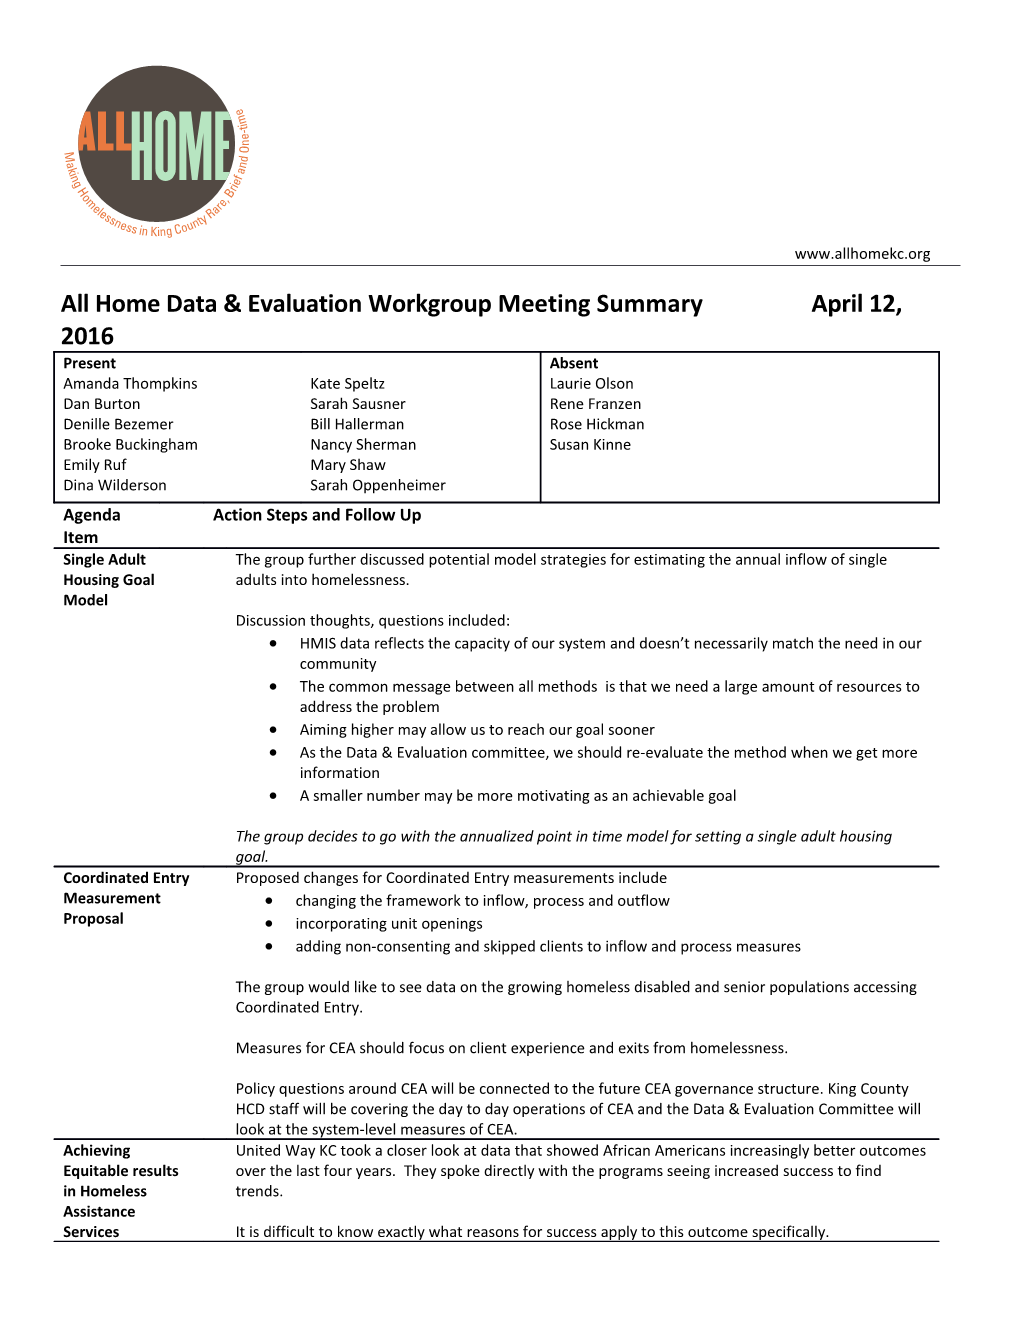 All Home Data & Evaluation Workgroup Meetingsummary April 12, 2016